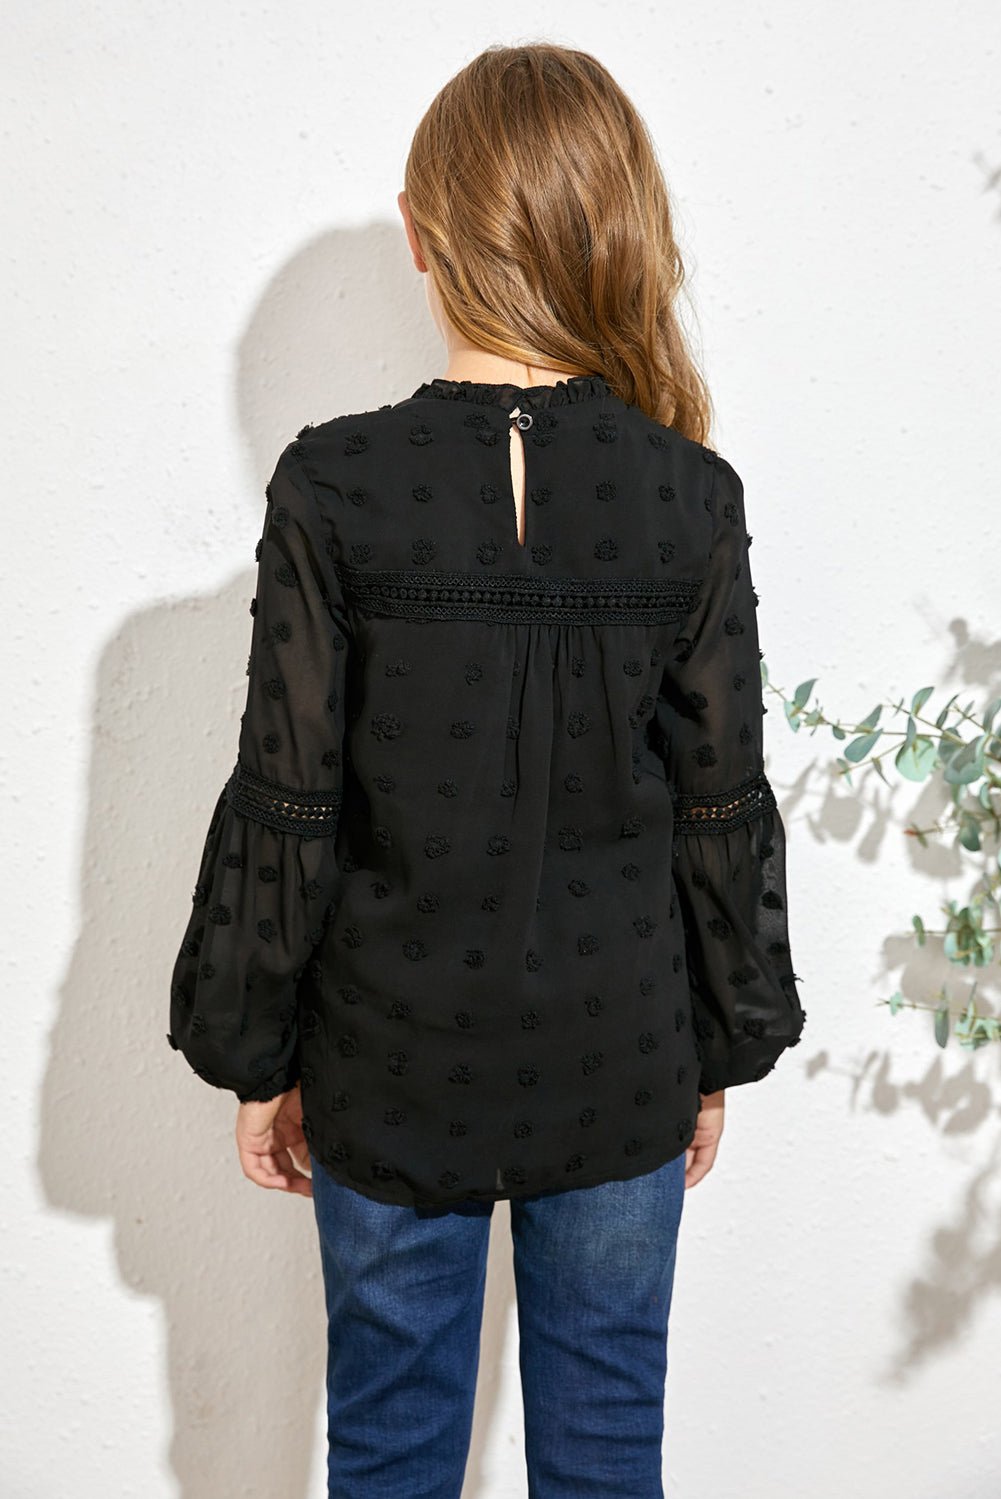 Girls Swiss Dot Spliced Lace Notched Blouse - Fashion Girl Online Store